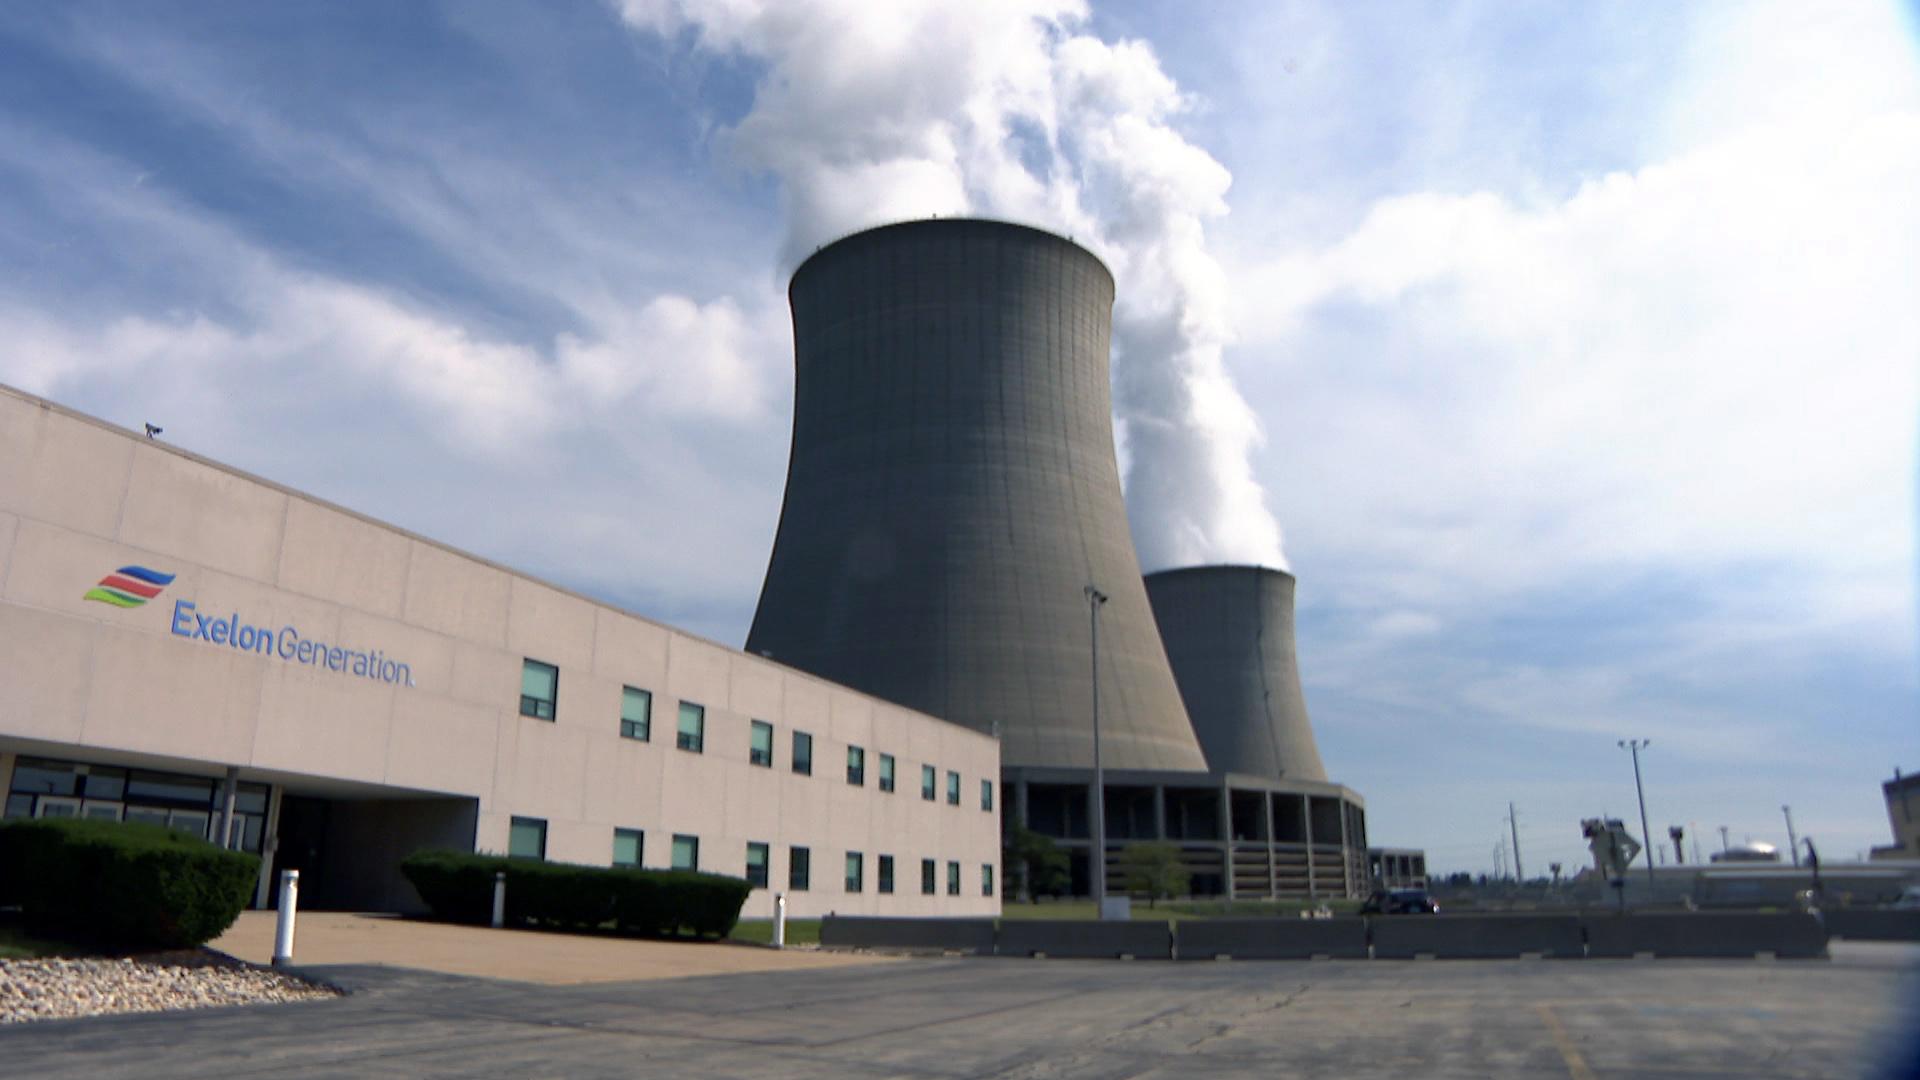 At full power, Byron’s nuclear plant is pumping out enough energy to power some 2 million northern Illinois homes. (WTTW News)